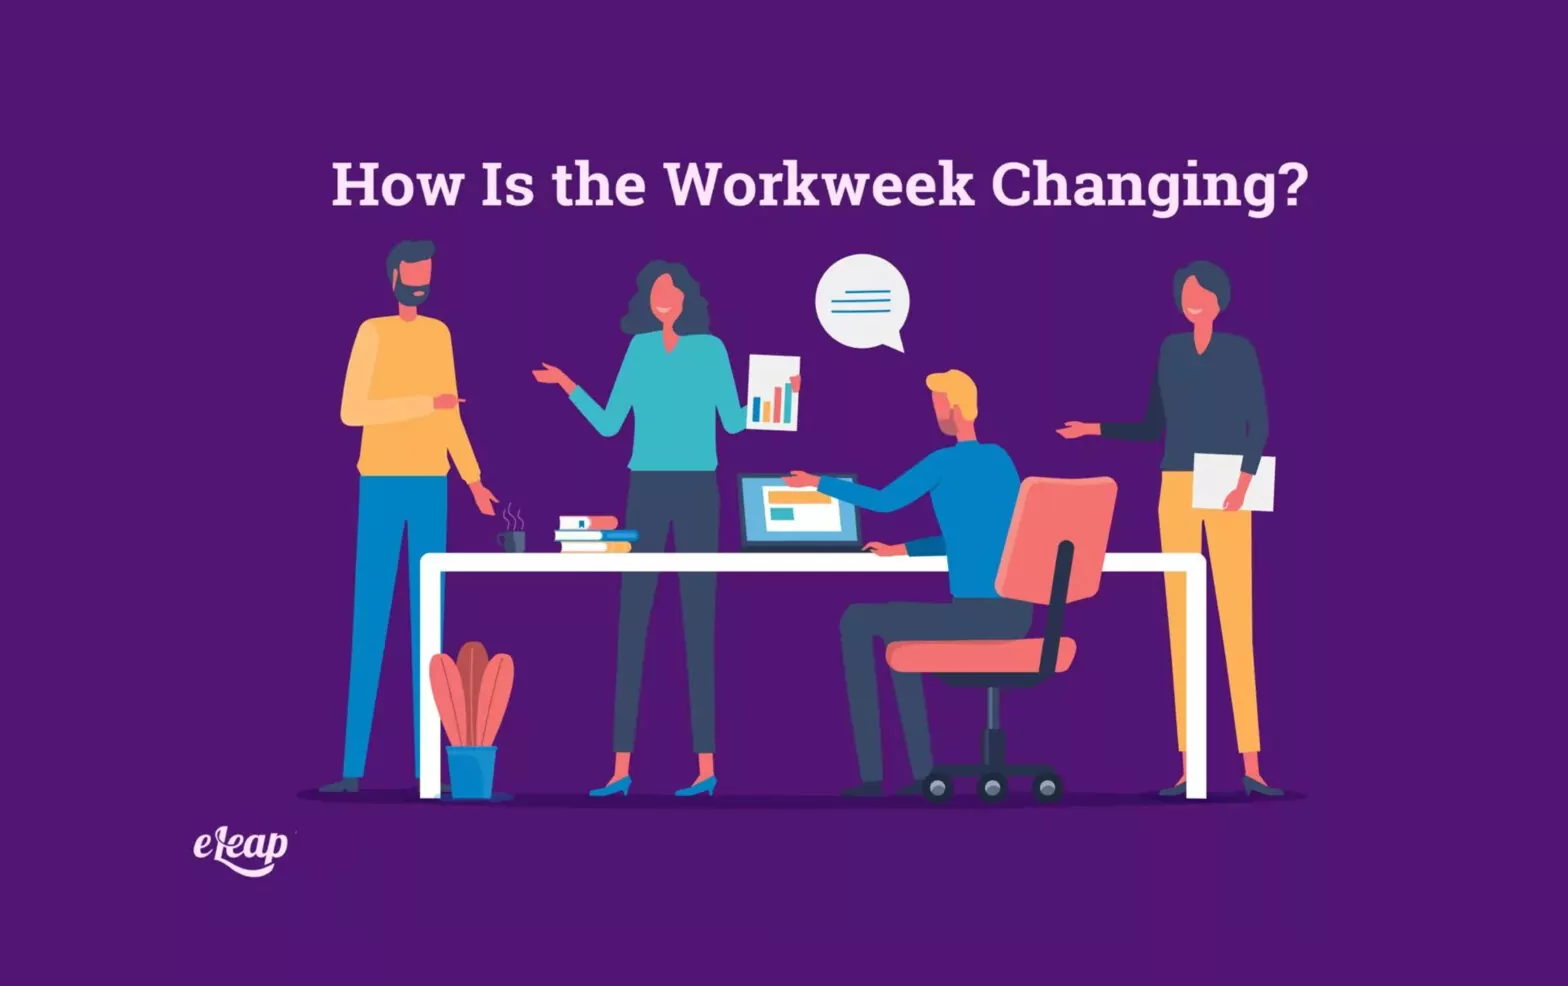 How Is the Workweek Changing?